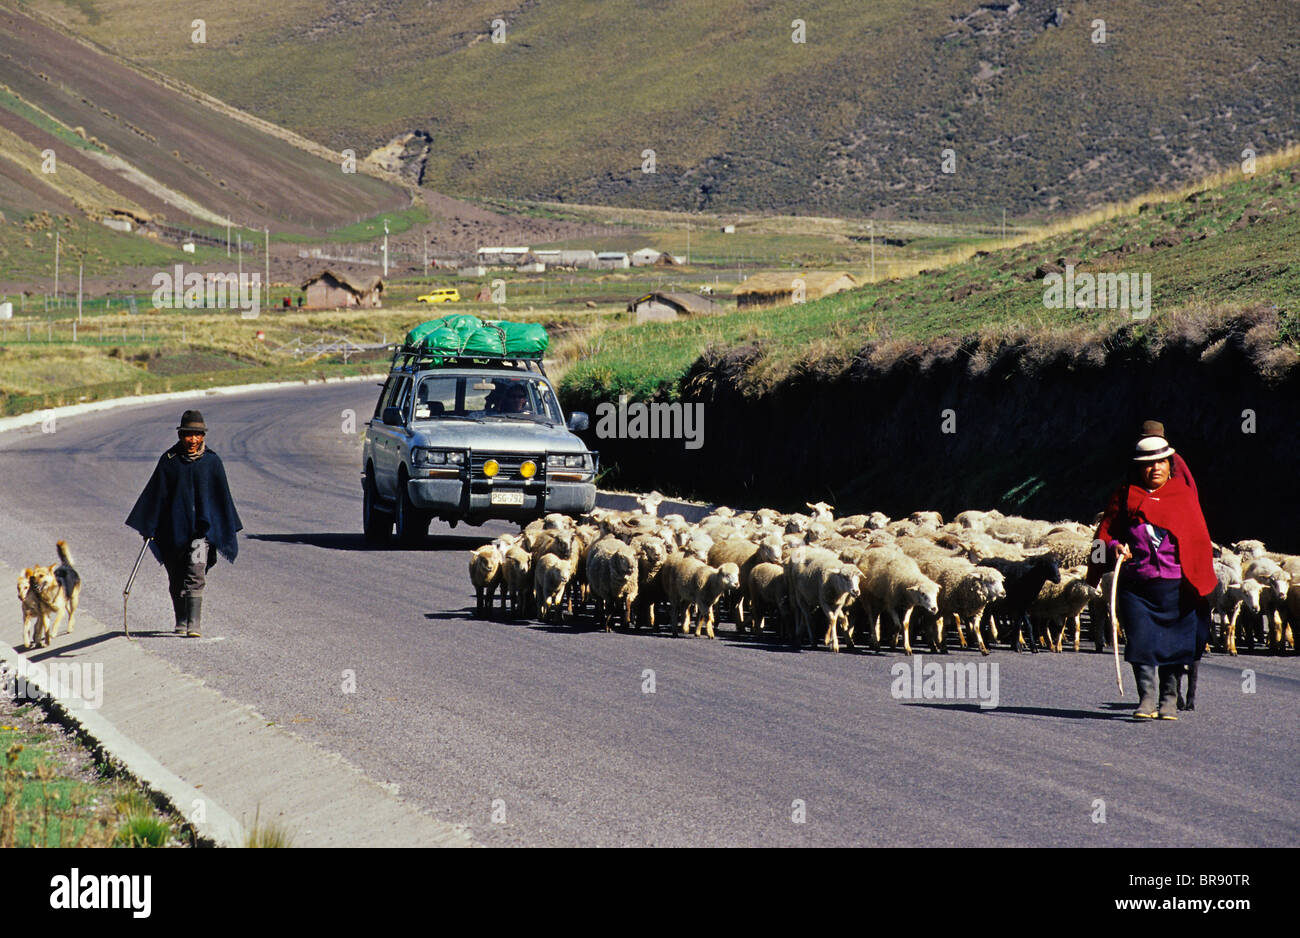 A car waits for sheep to clear the road. Ecuador. Stock Photo